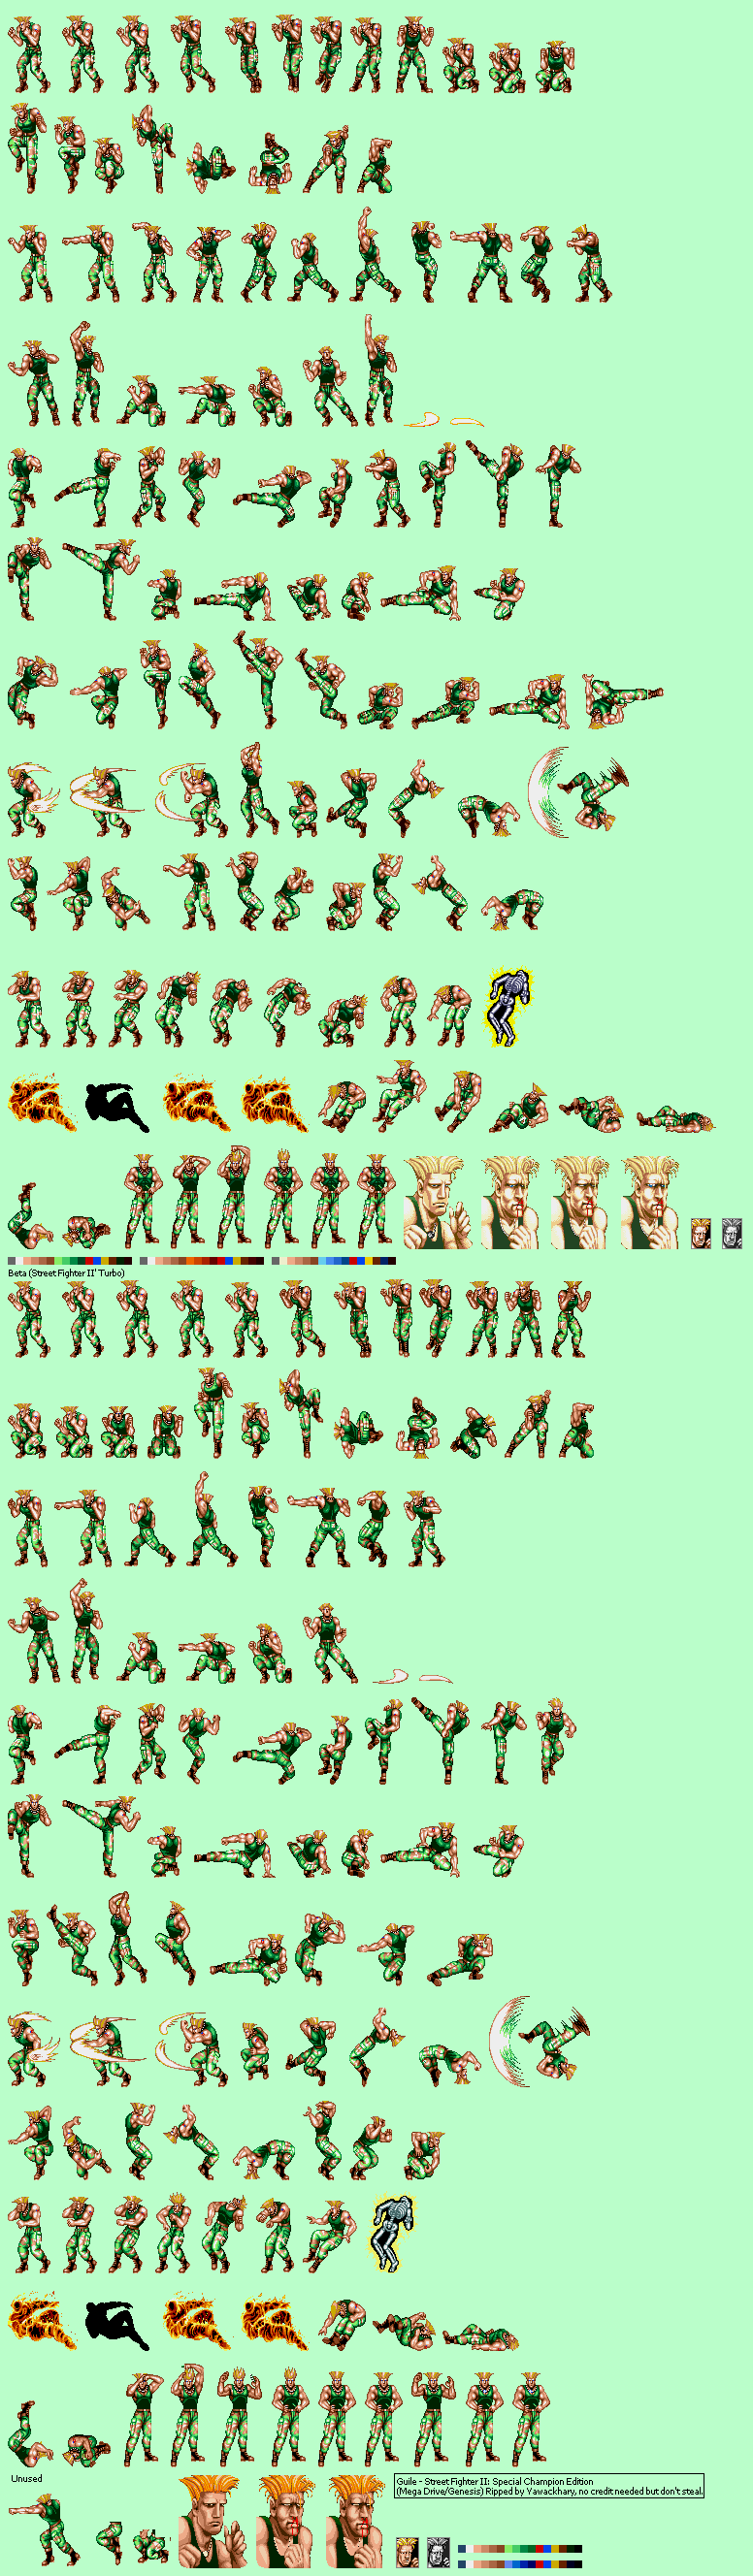 Mobile - Street Fighter 4 2011 - Guile - The Spriters Resource